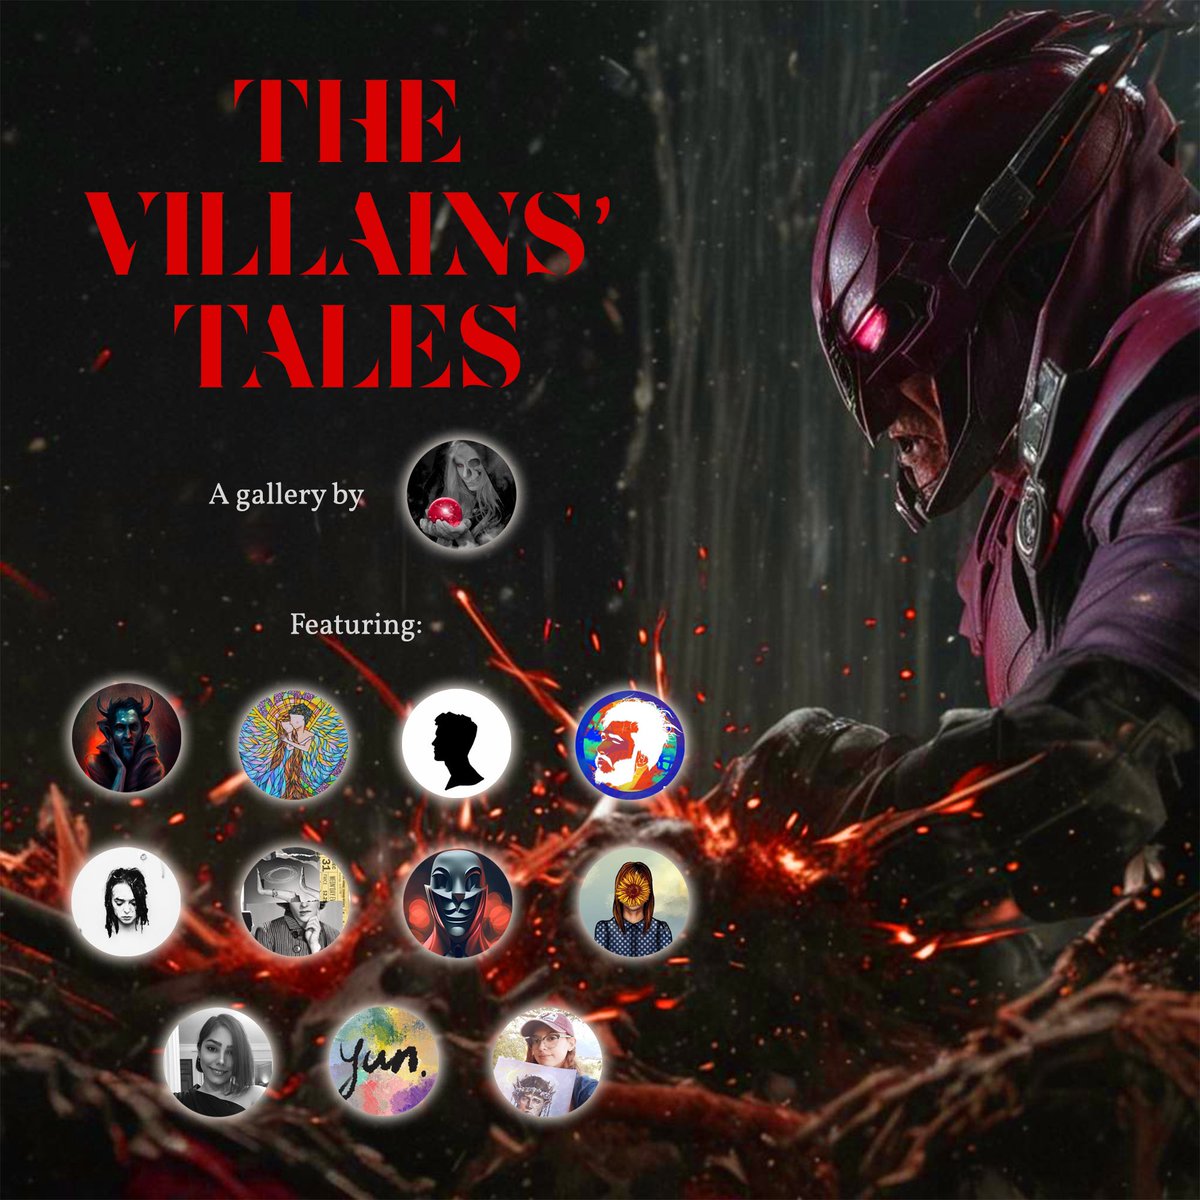 ❗️THE VILLAINS’ TALES❗️

The Villains’ Tales, shrouded in darkness and ambiguity, make us explore the depths of human nature and the moral ambiguities that define our existence. This exhibition featuring 11 artists explore their Villains' ambitions, desires, and the pursuit of…